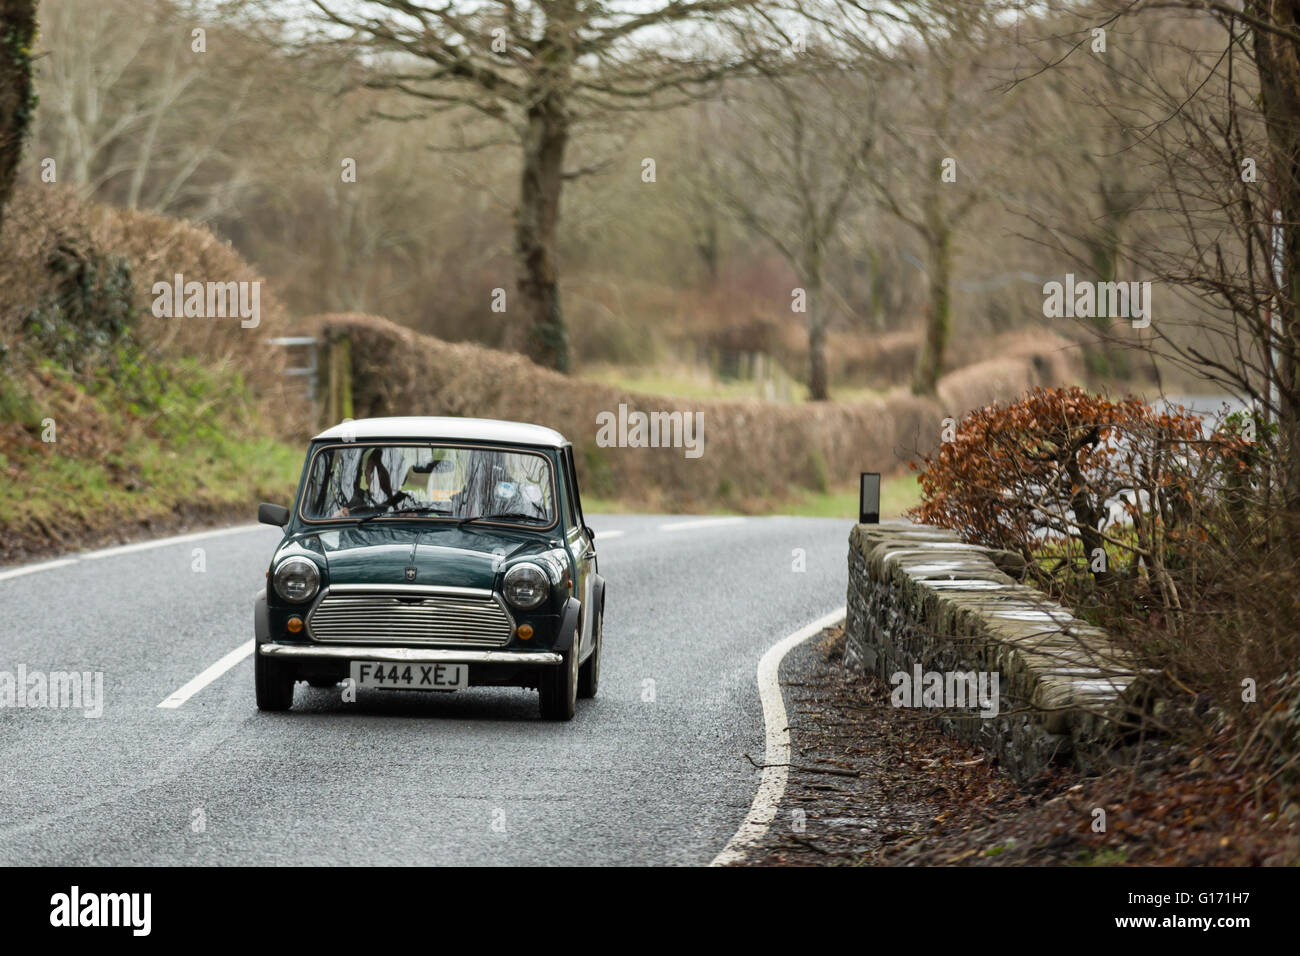 A green vintage mini driving along a road Stock Photo